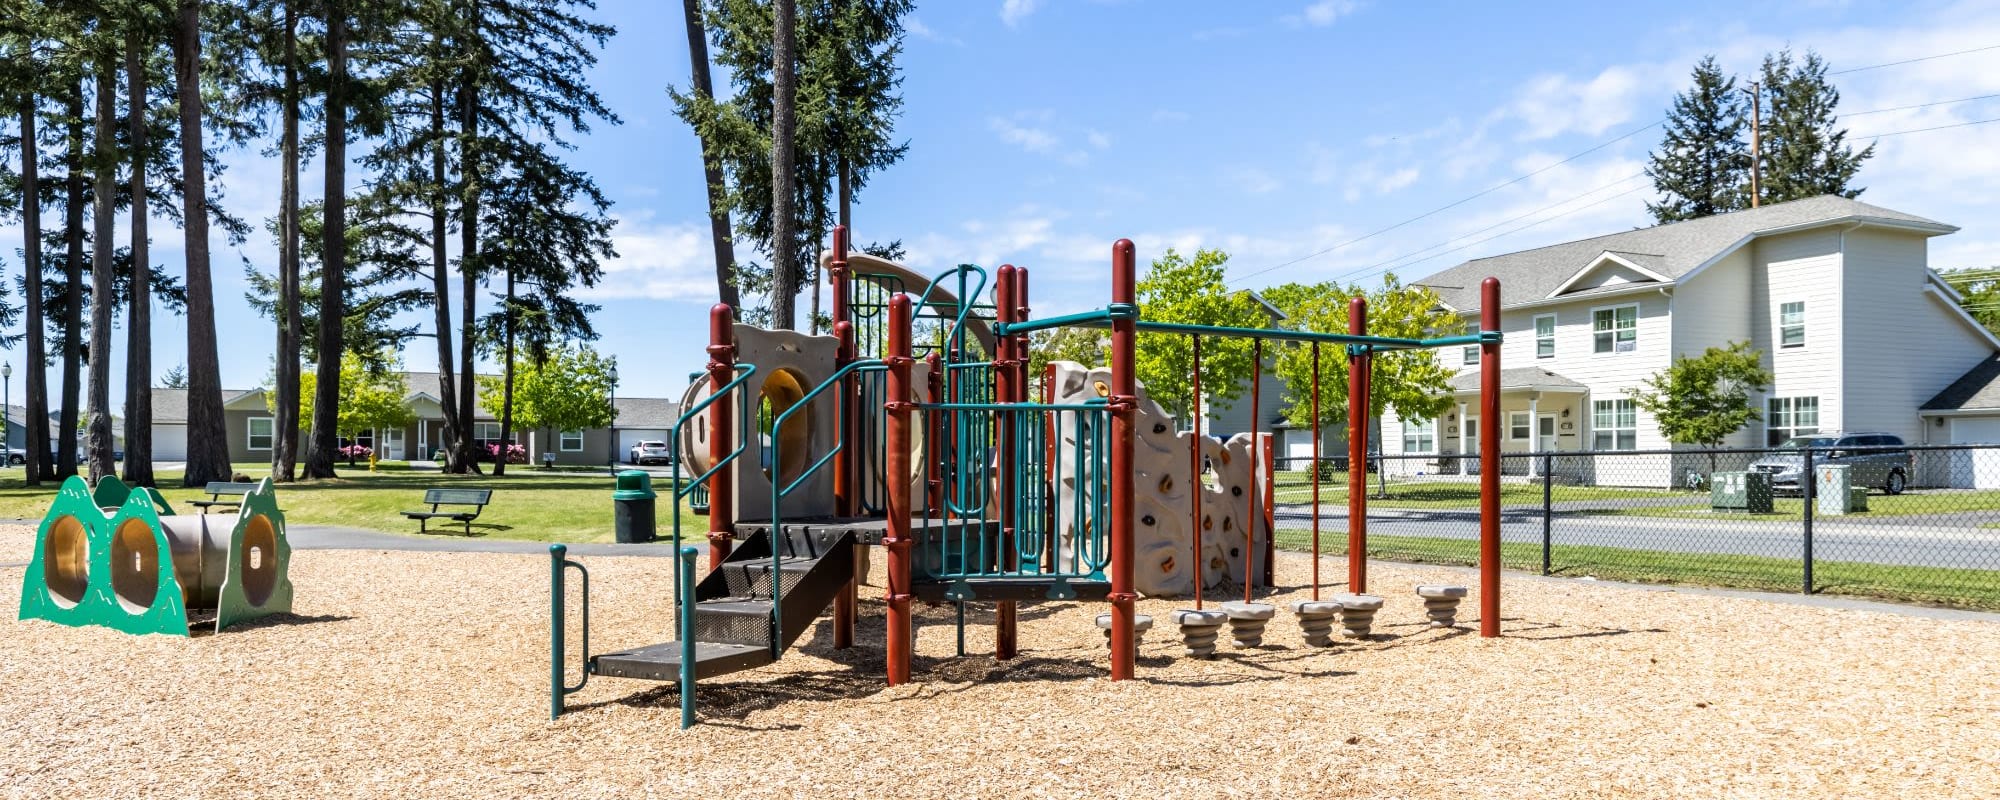 Playground near Discovery Village in Joint Base Lewis McChord, Washington